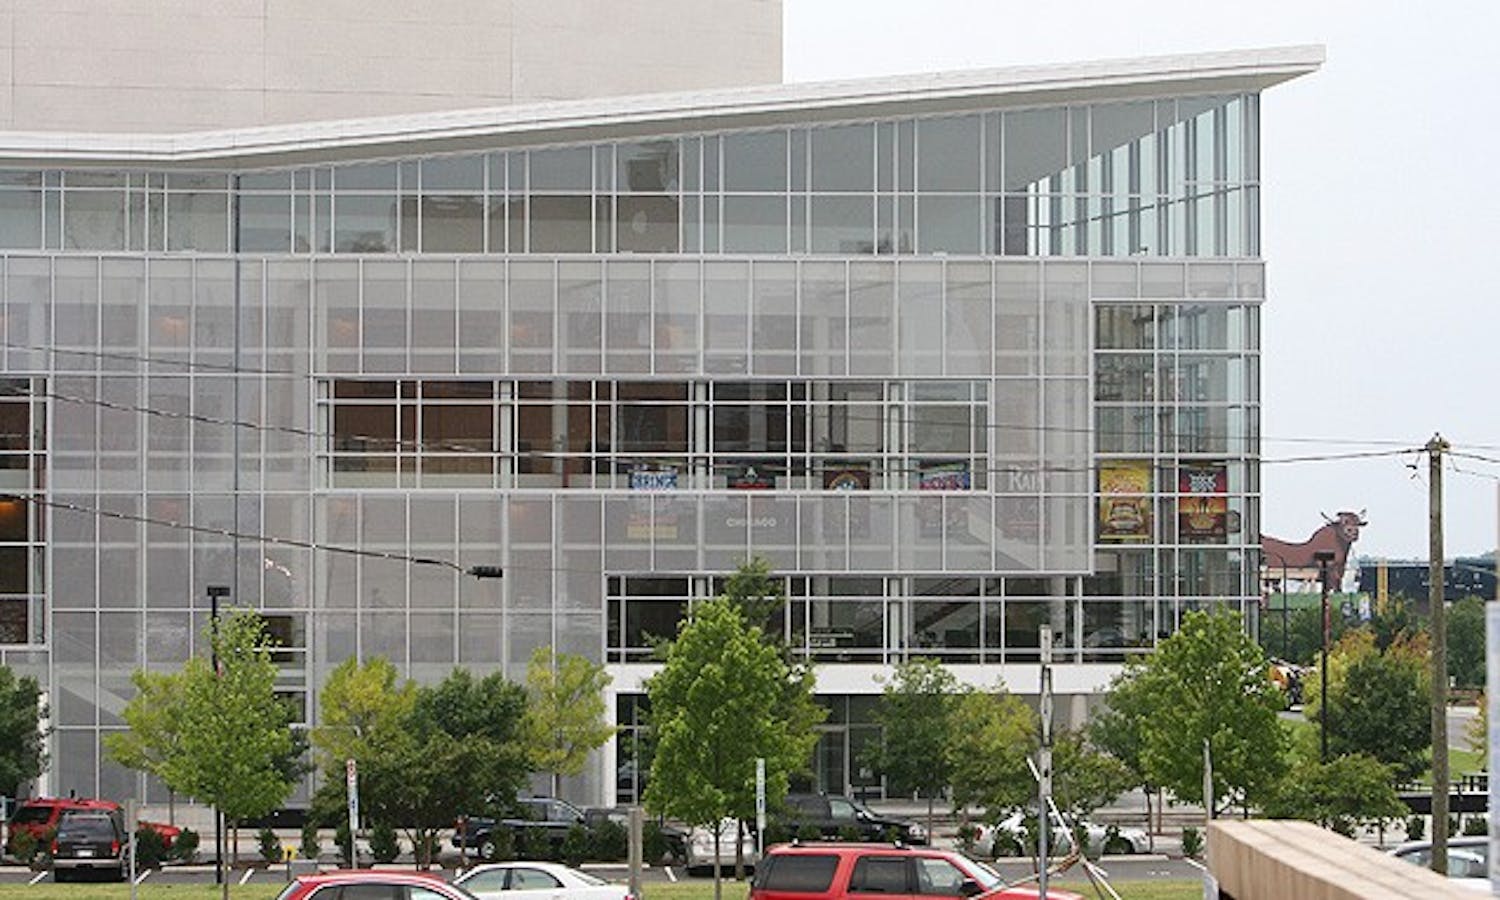 The Durham Performing Arts Center, which hosts more than 150 events per year, grossed profits of $2.5 million in the previous fiscal year. More than $1 million of those dollars went directly to the city of Durham.